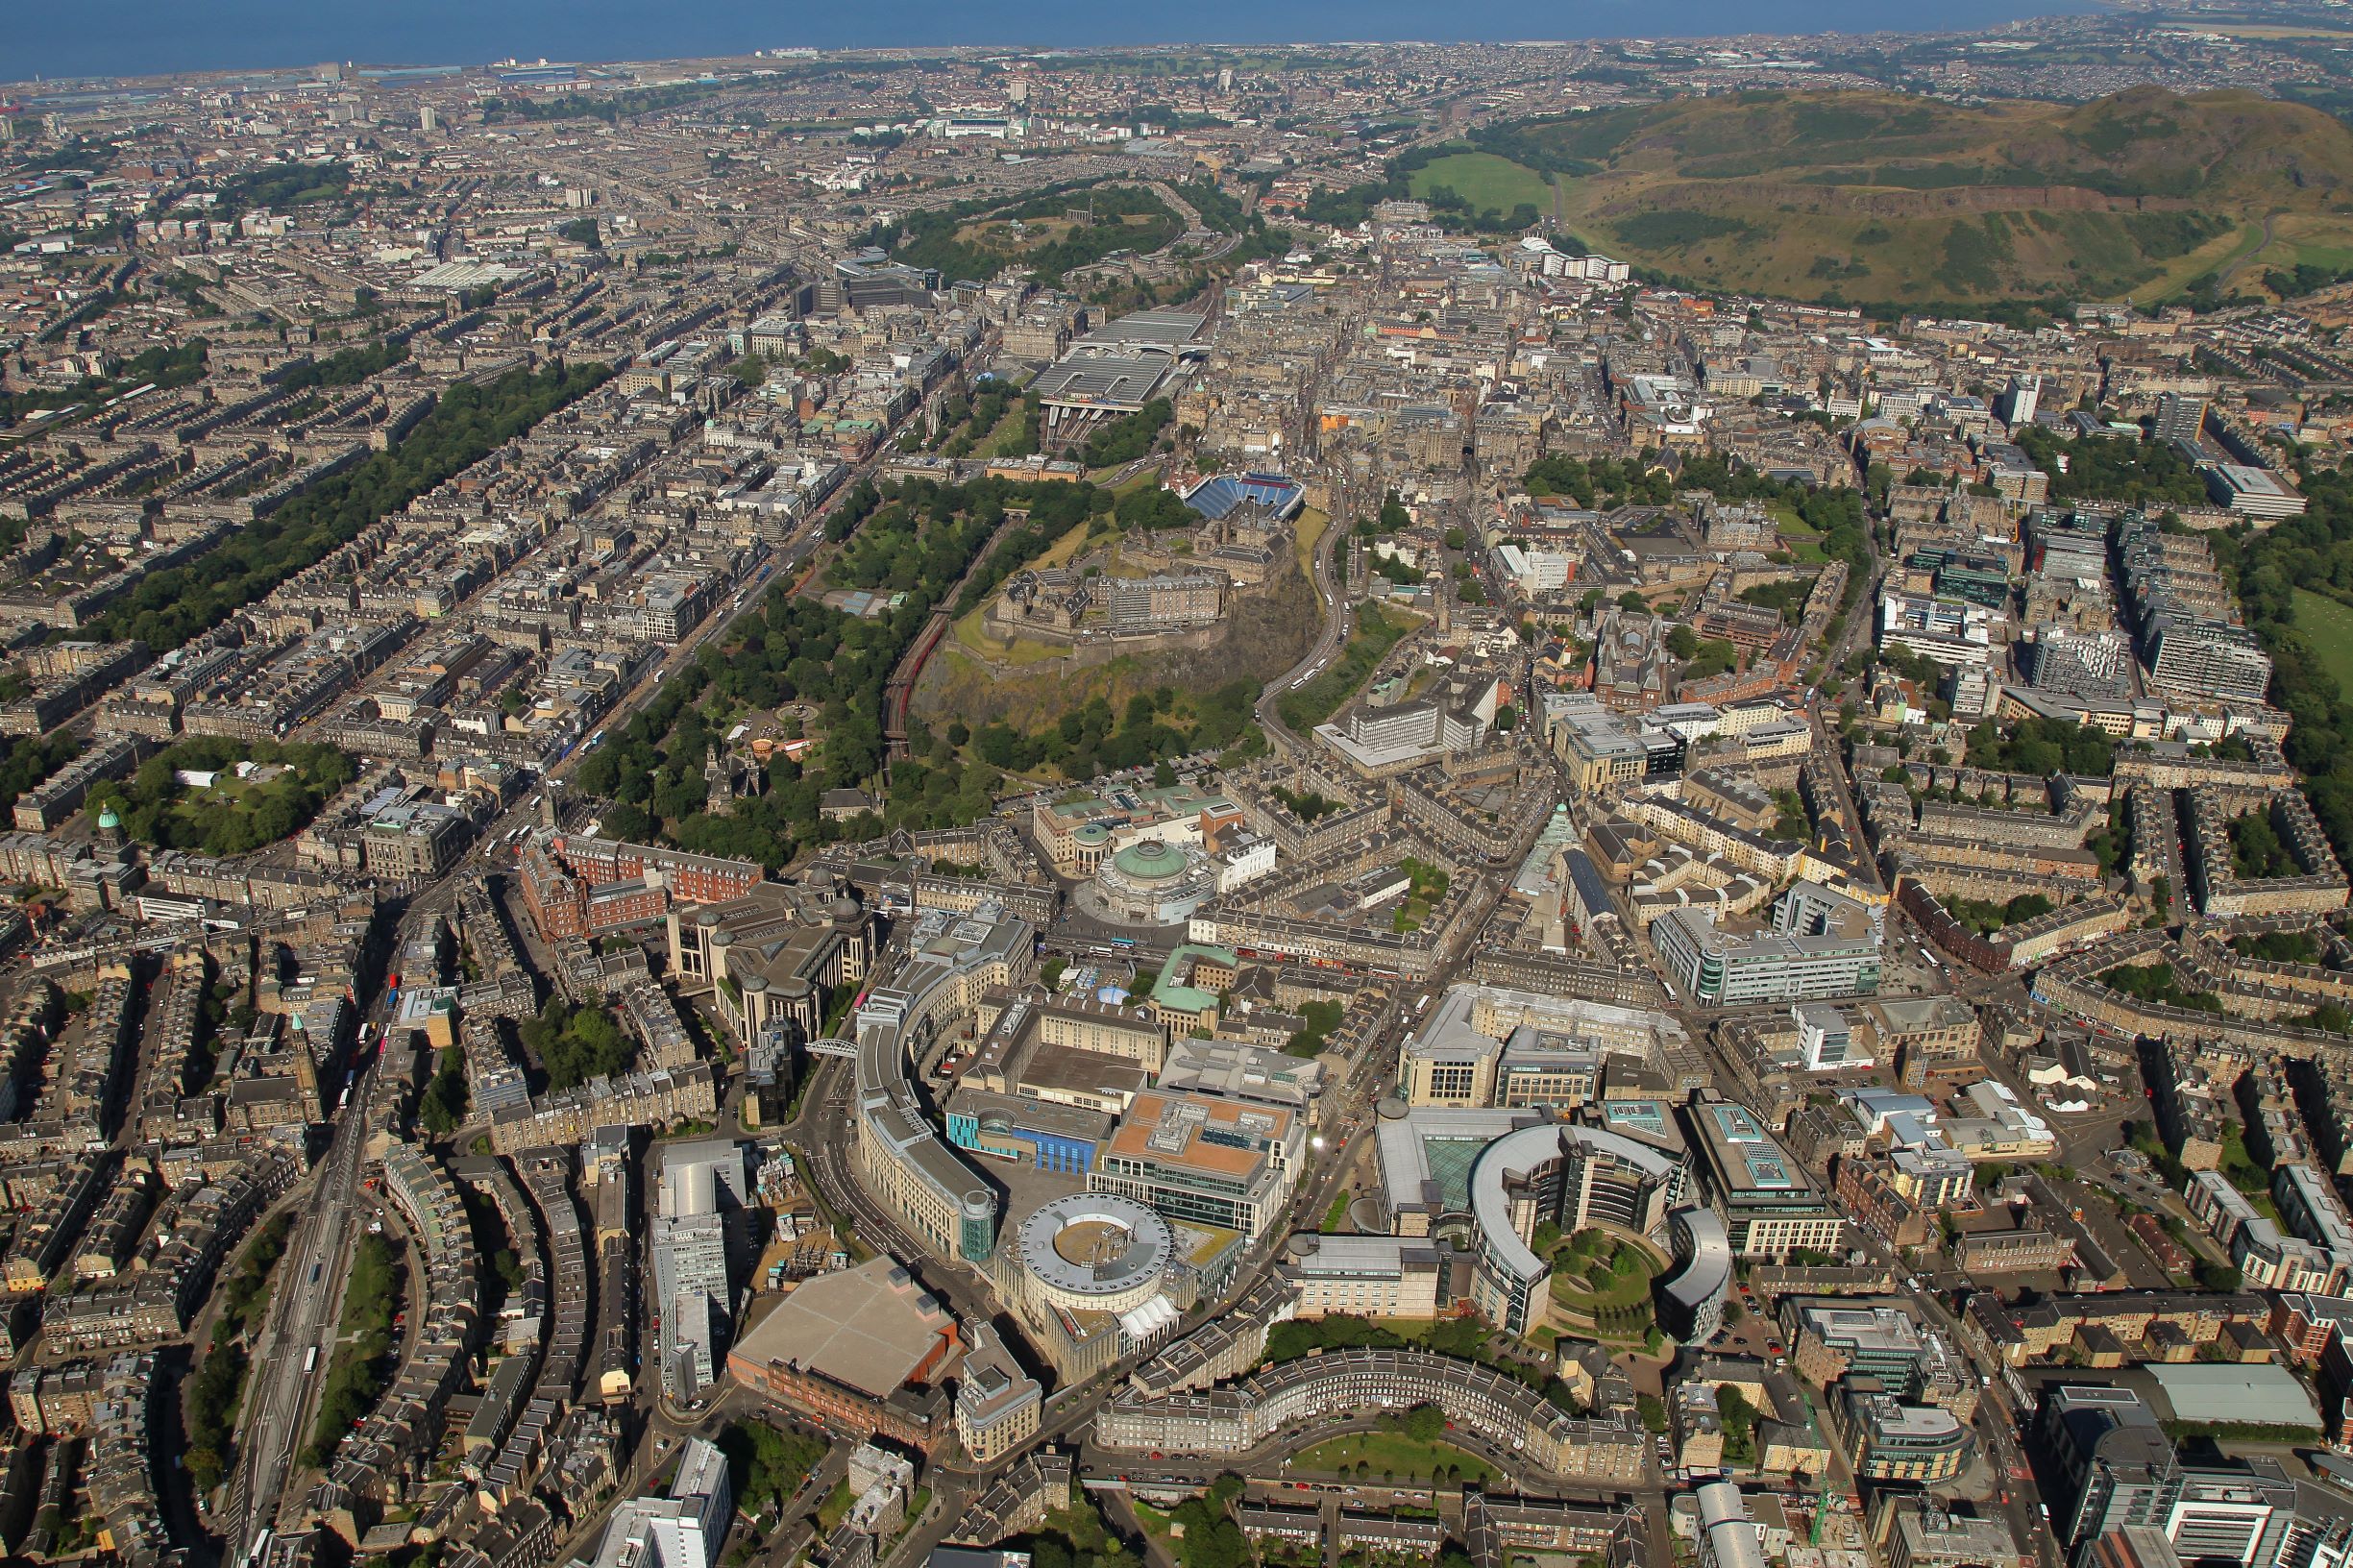 Plan required to protect Edinburgh offices from ‘double-edged sword’ of tourism